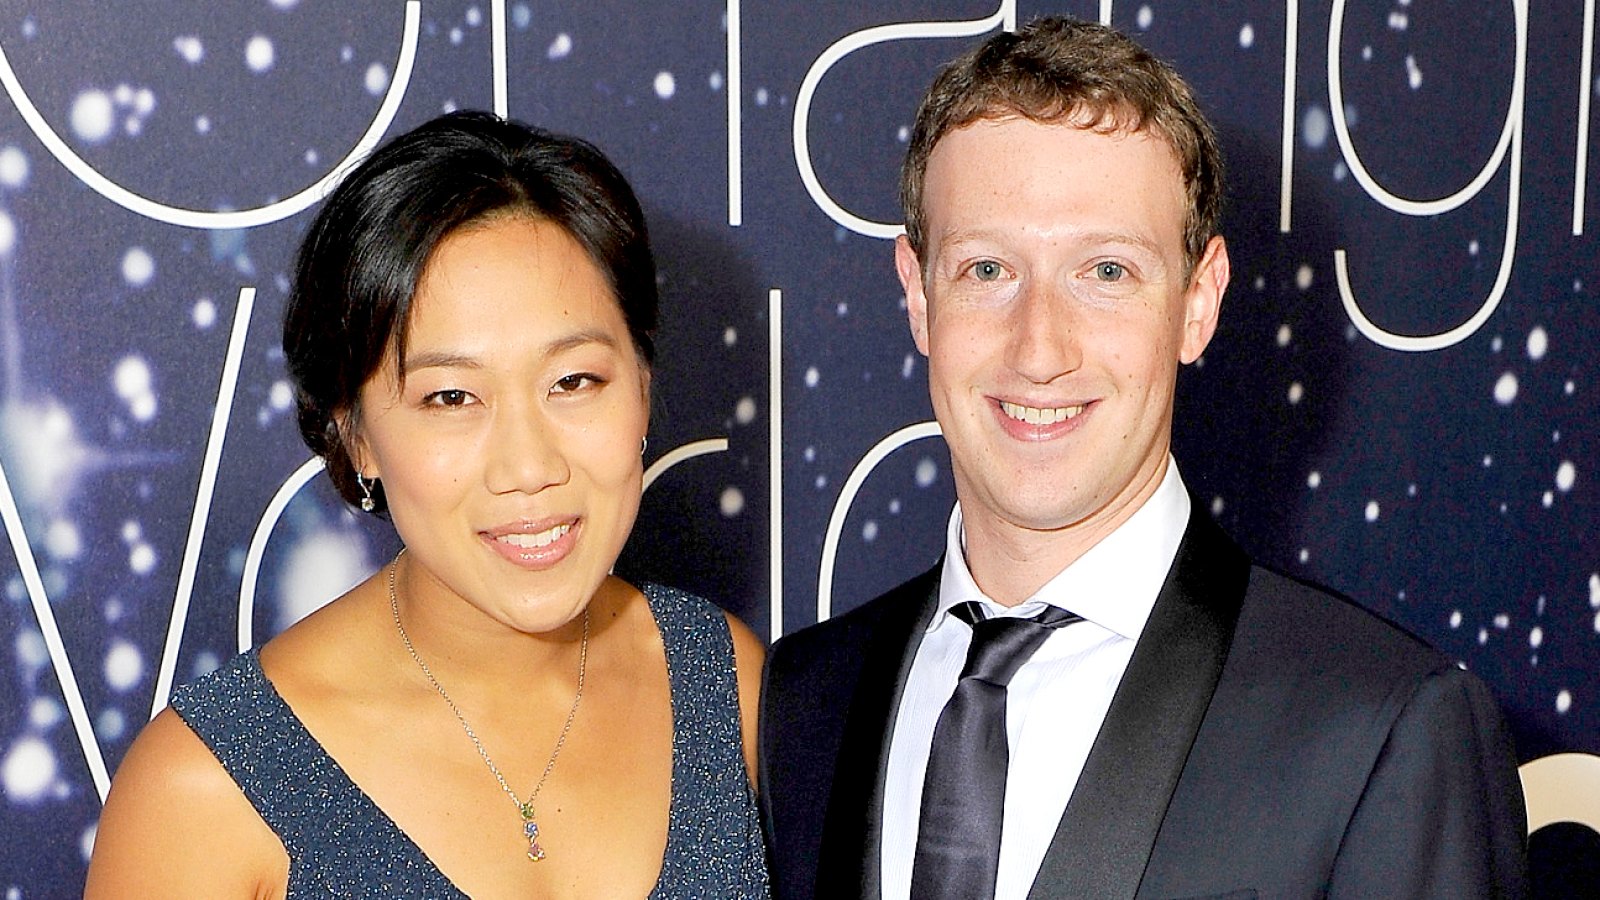 Priscilla Chan and Mark Zuckerberg attend the Breakthrough Prize Awards Ceremony Hosted By Seth MacFarlane at NASA Ames Research Center on November 9, 2014 in Mountain View, California.